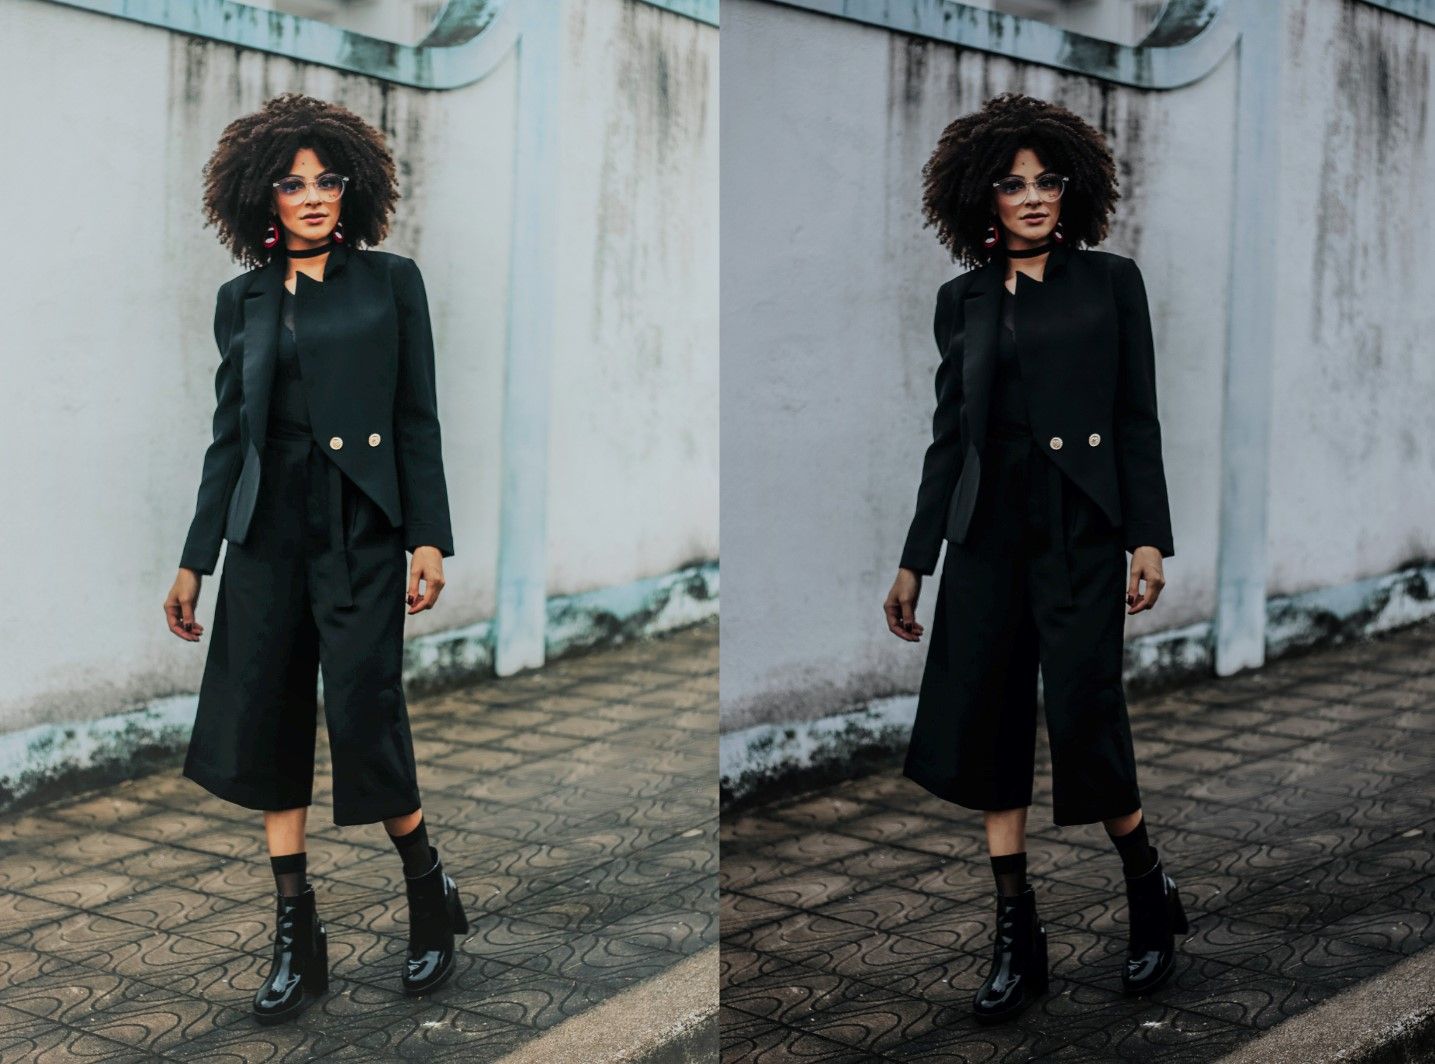 Pre and Post Edit of Woman in Black Outfit Walking on Sidewalk